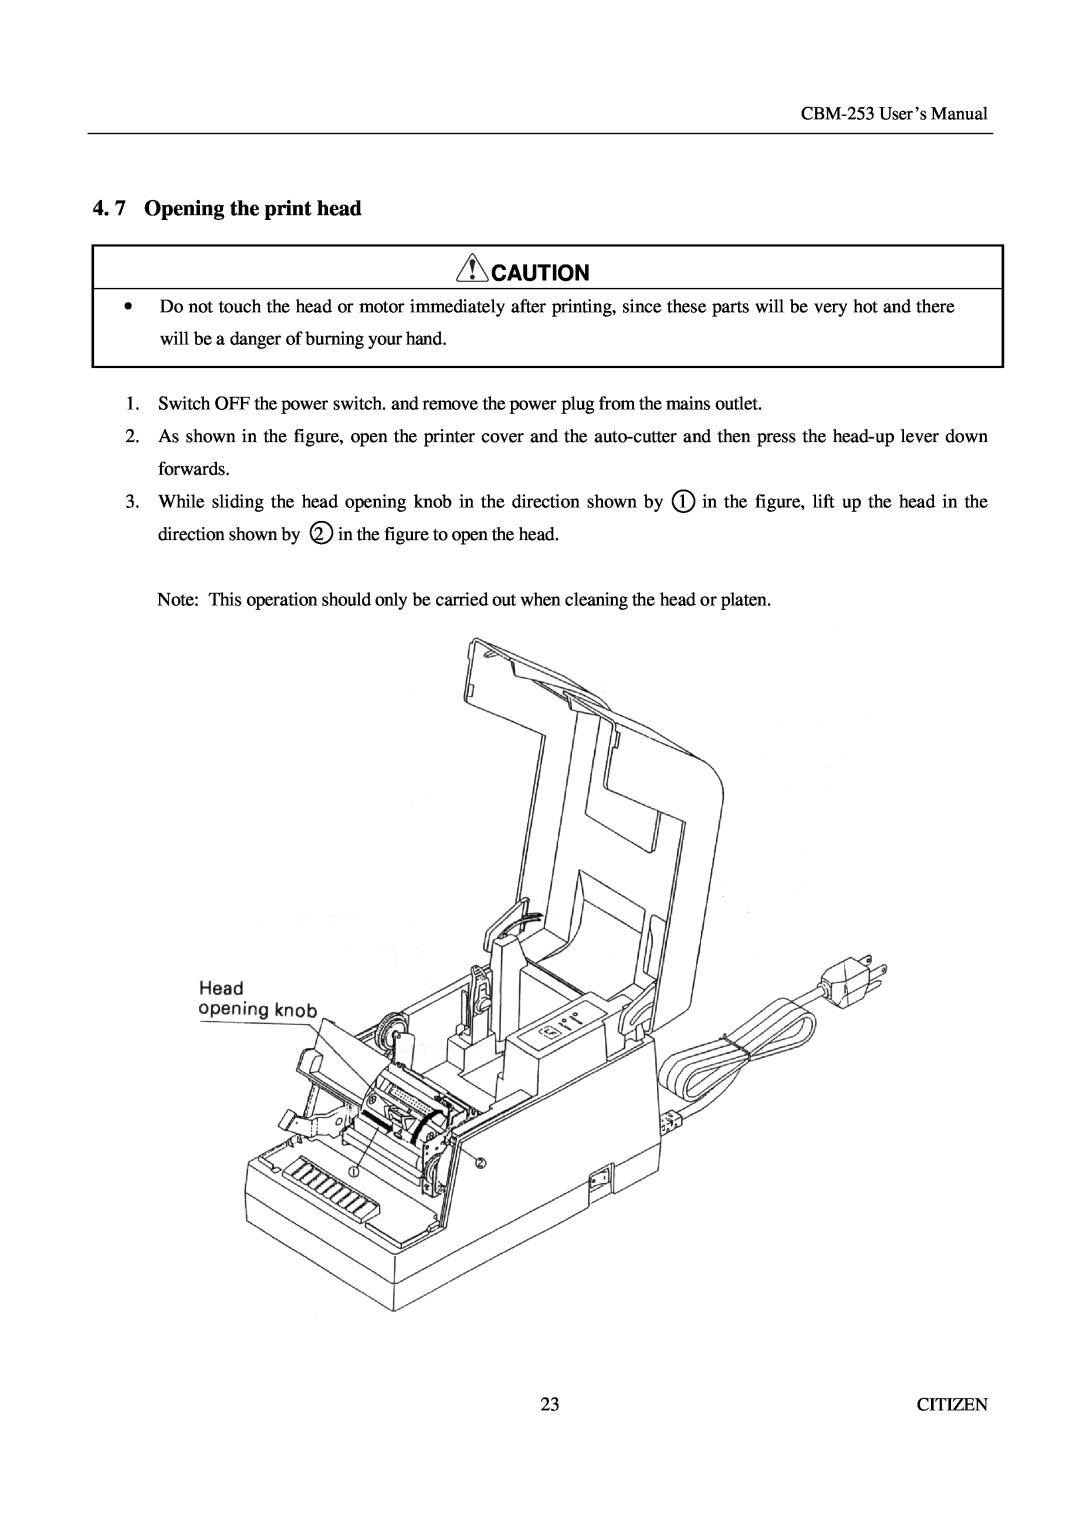 Citizen Systems CBM-253 manual 4. 7 Opening the print head 